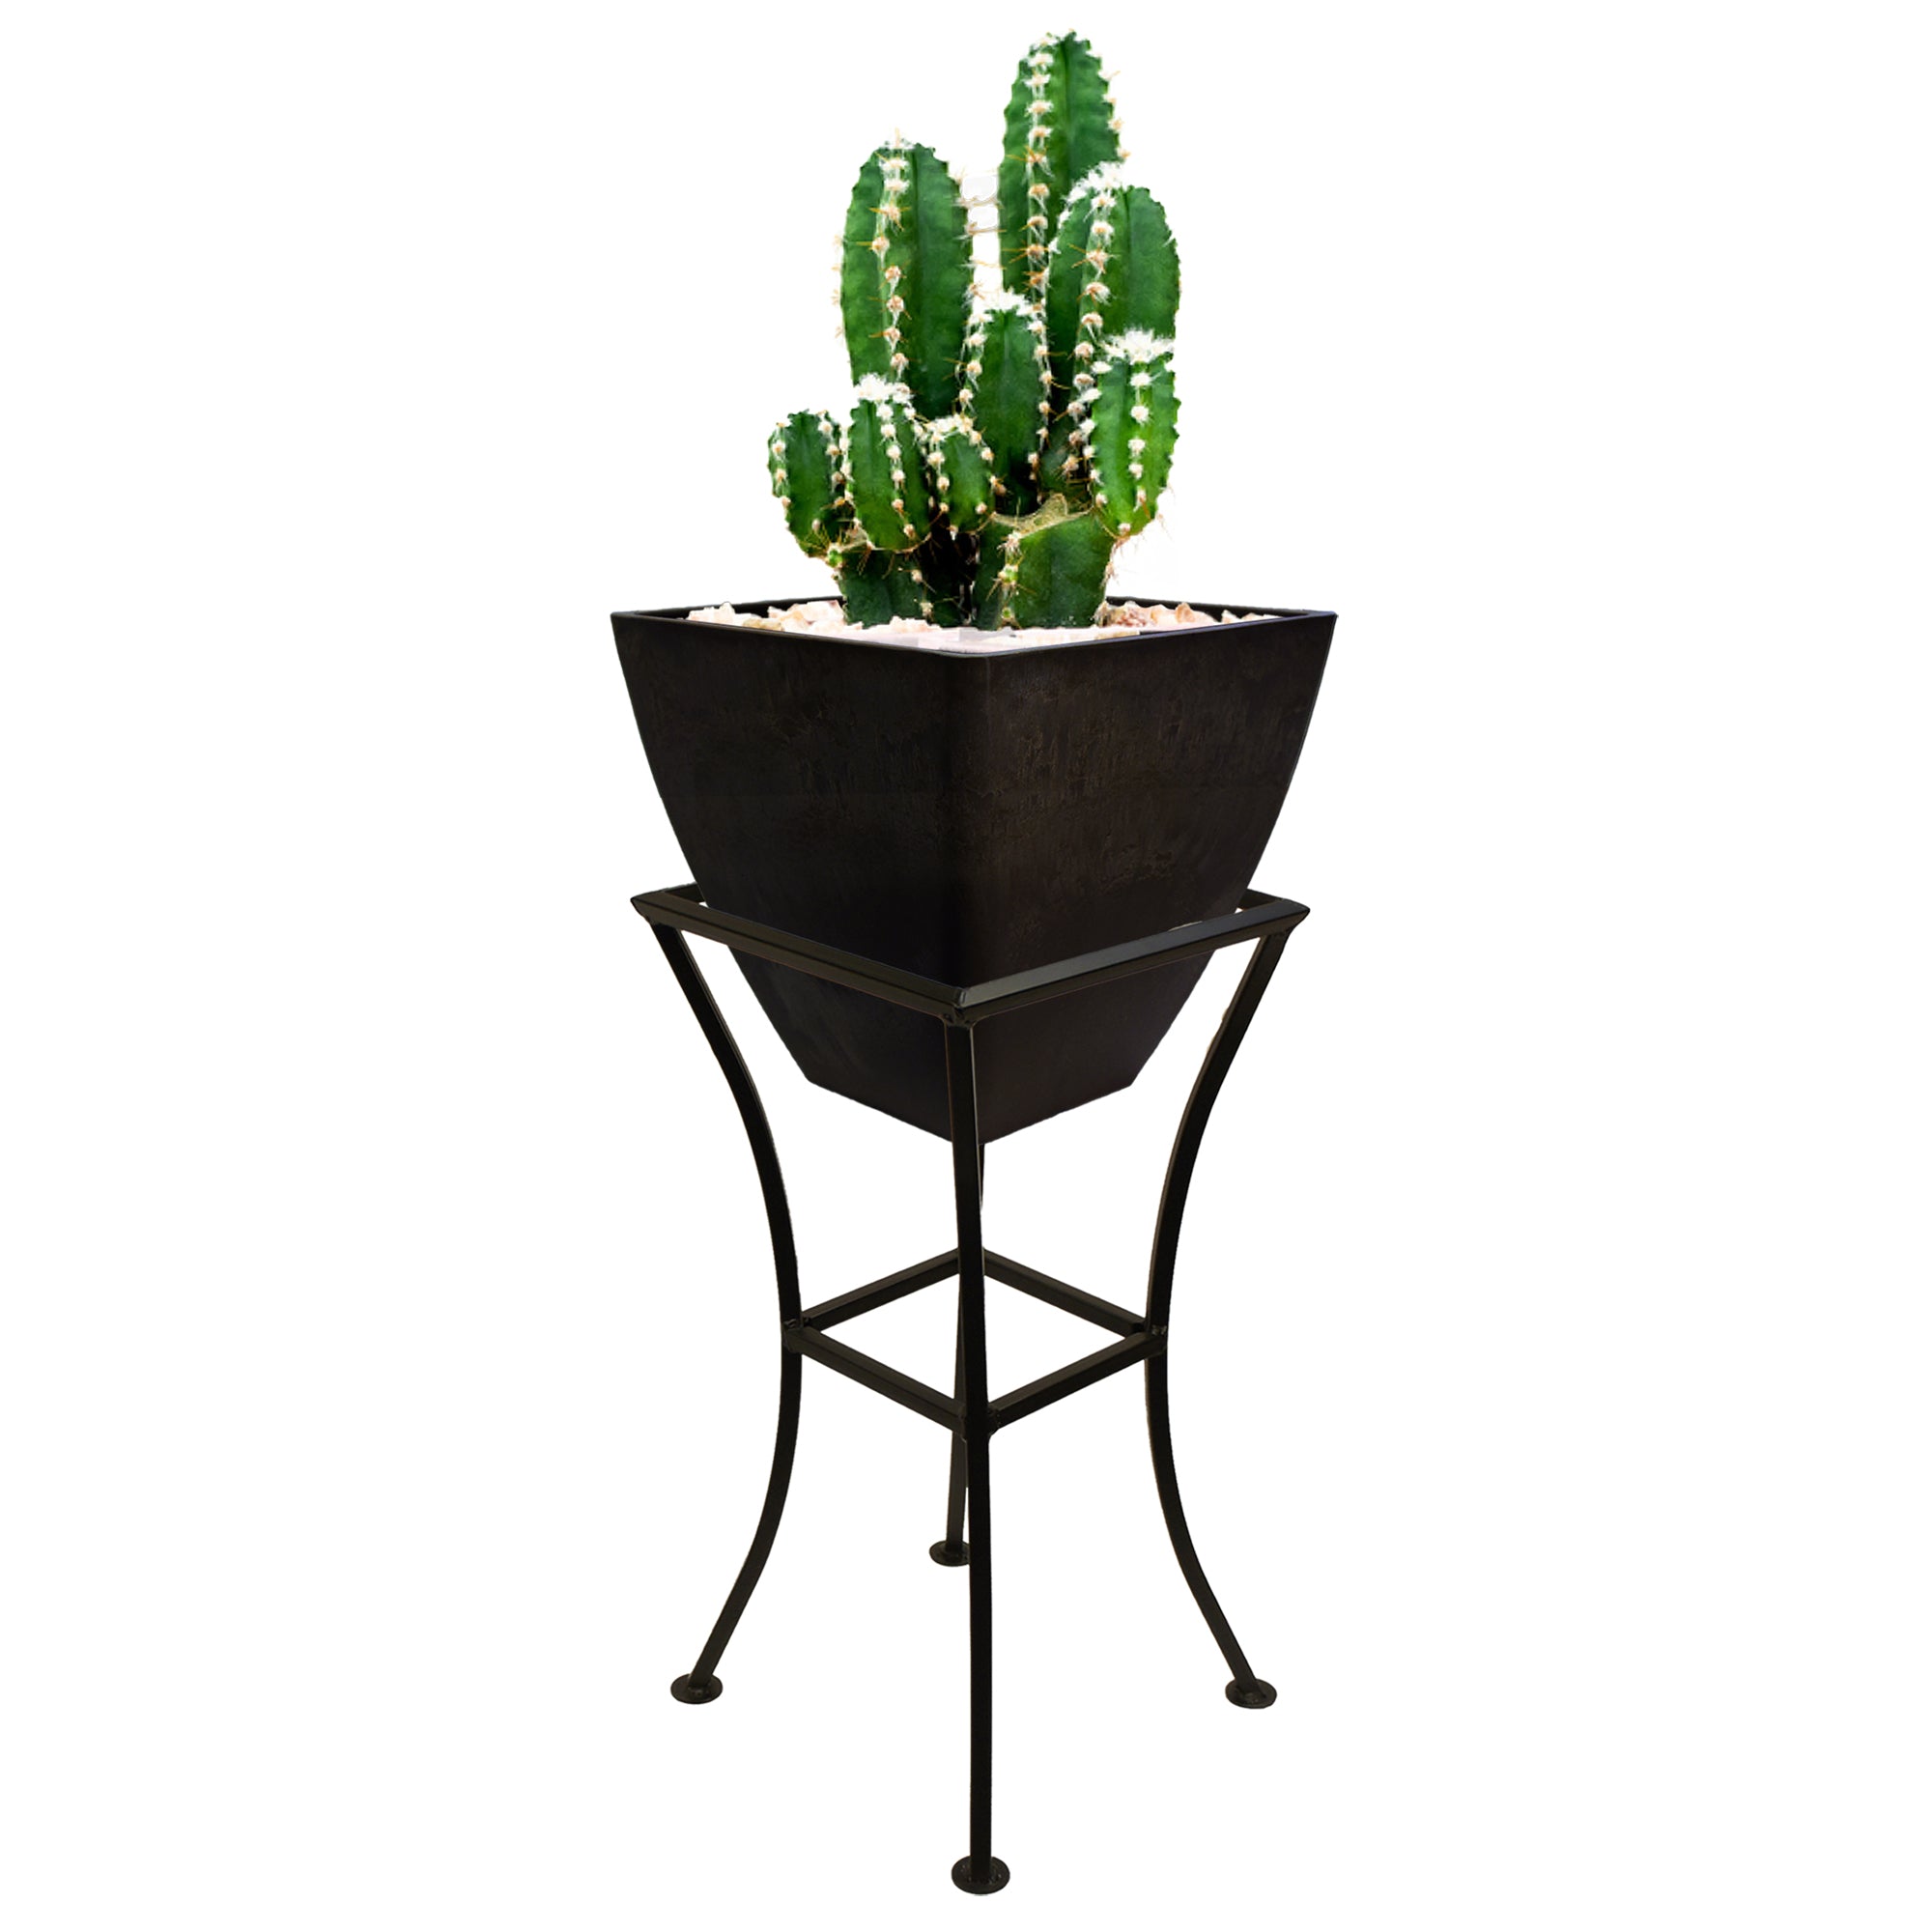 12x12 graphite square planter with a stand and cactus inside on a white background